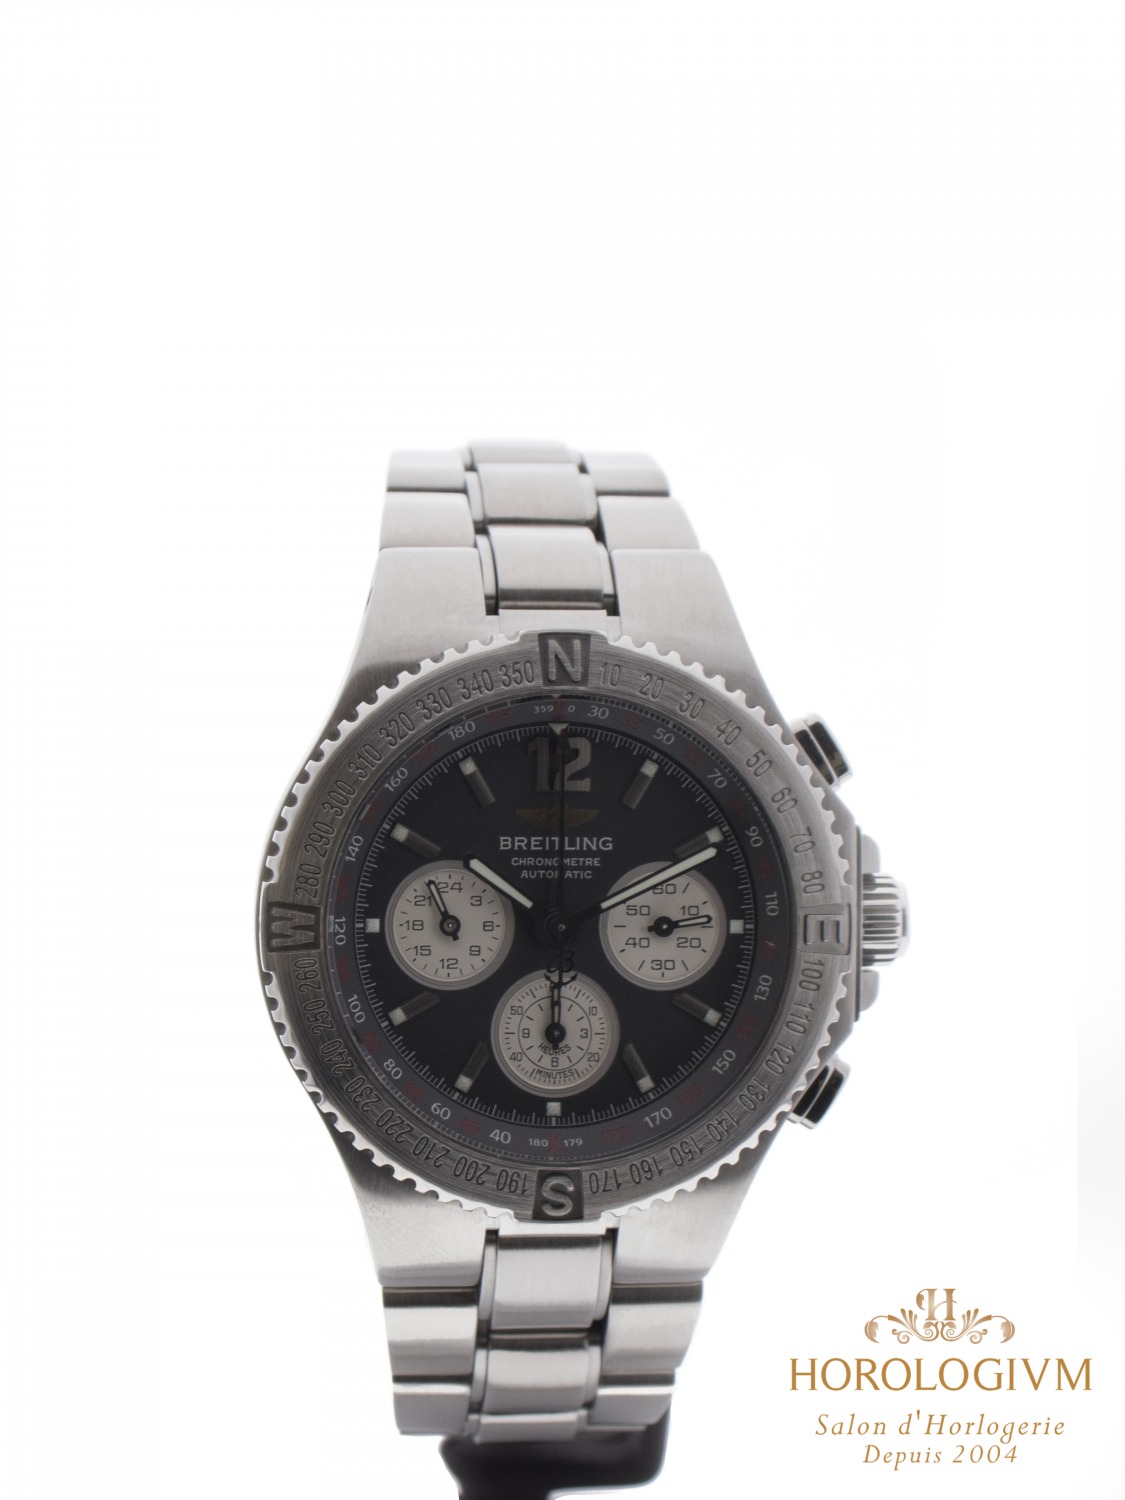 Breitling Hercules Chronograph 45MM Ref. A39363 watch, silver